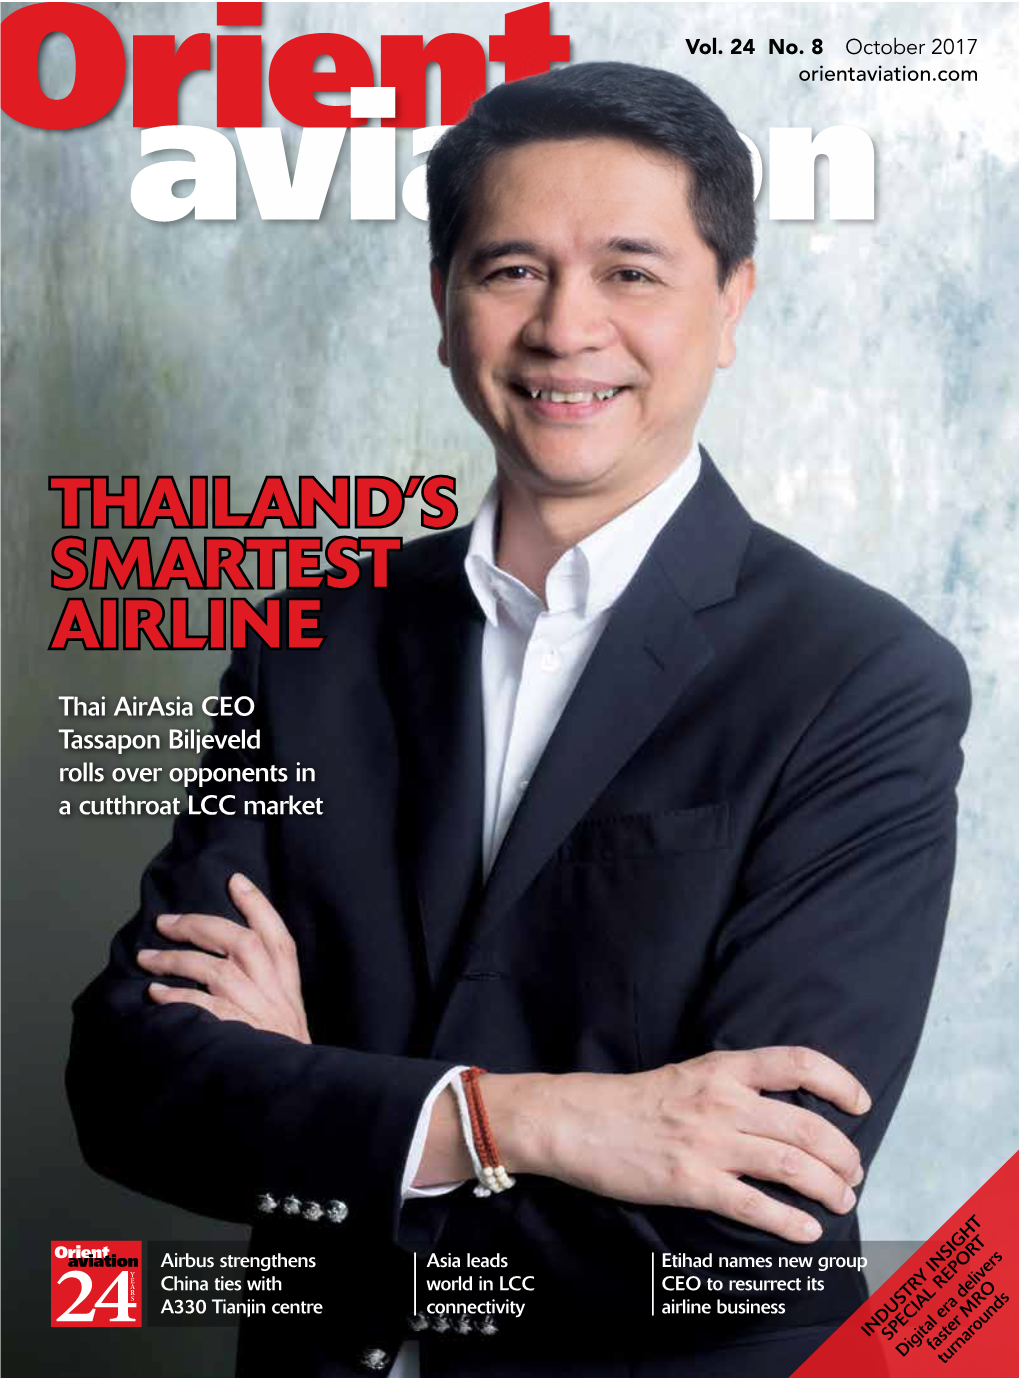 THAILAND's SMARTEST AIRLINE Thai Airasia Is the Only Thai Airline to Be in Proﬁt This Year